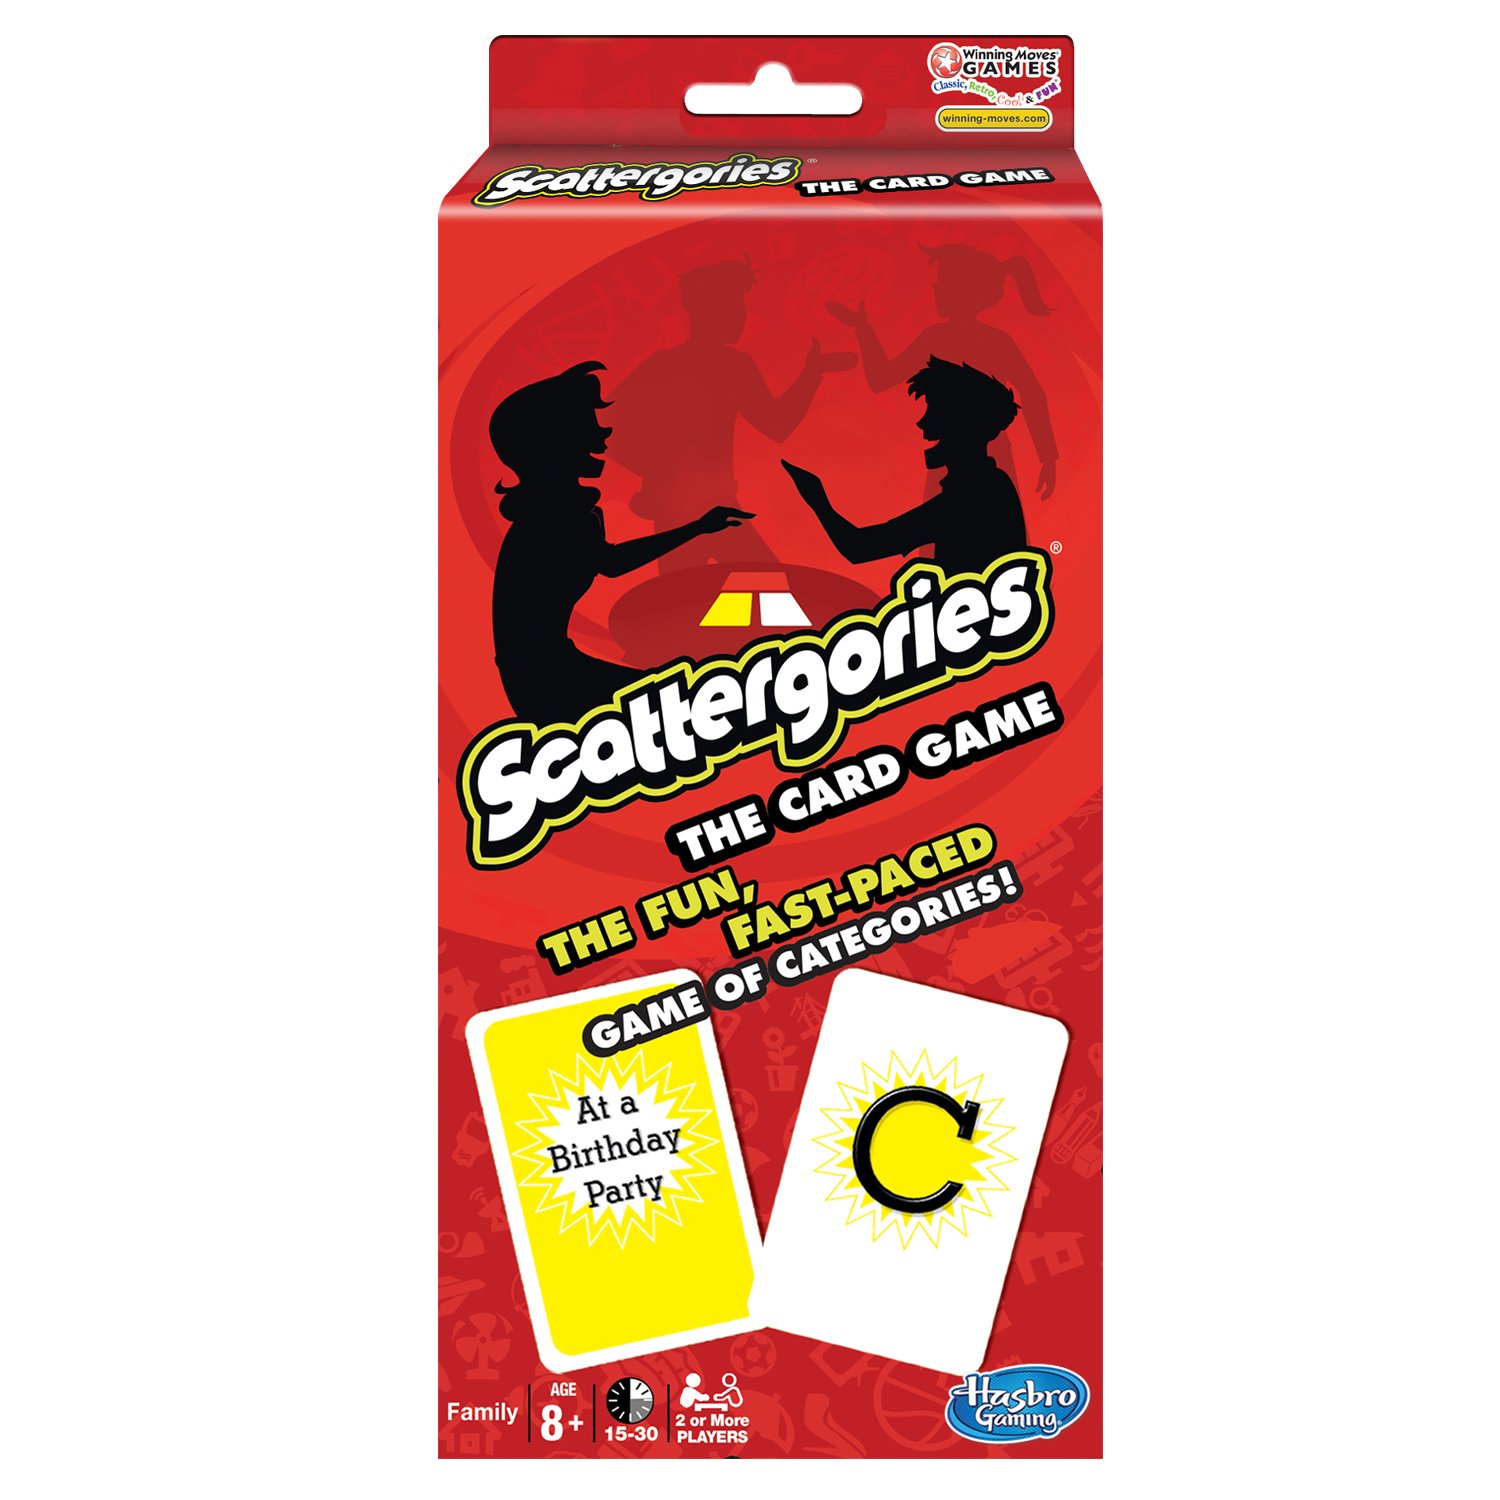 Scattergories The Card Game Your Favorite Categories Game Meets Slap Jack For At Home, On a Road Trip, or Vacation 2 or More Players Ages 8 and Up